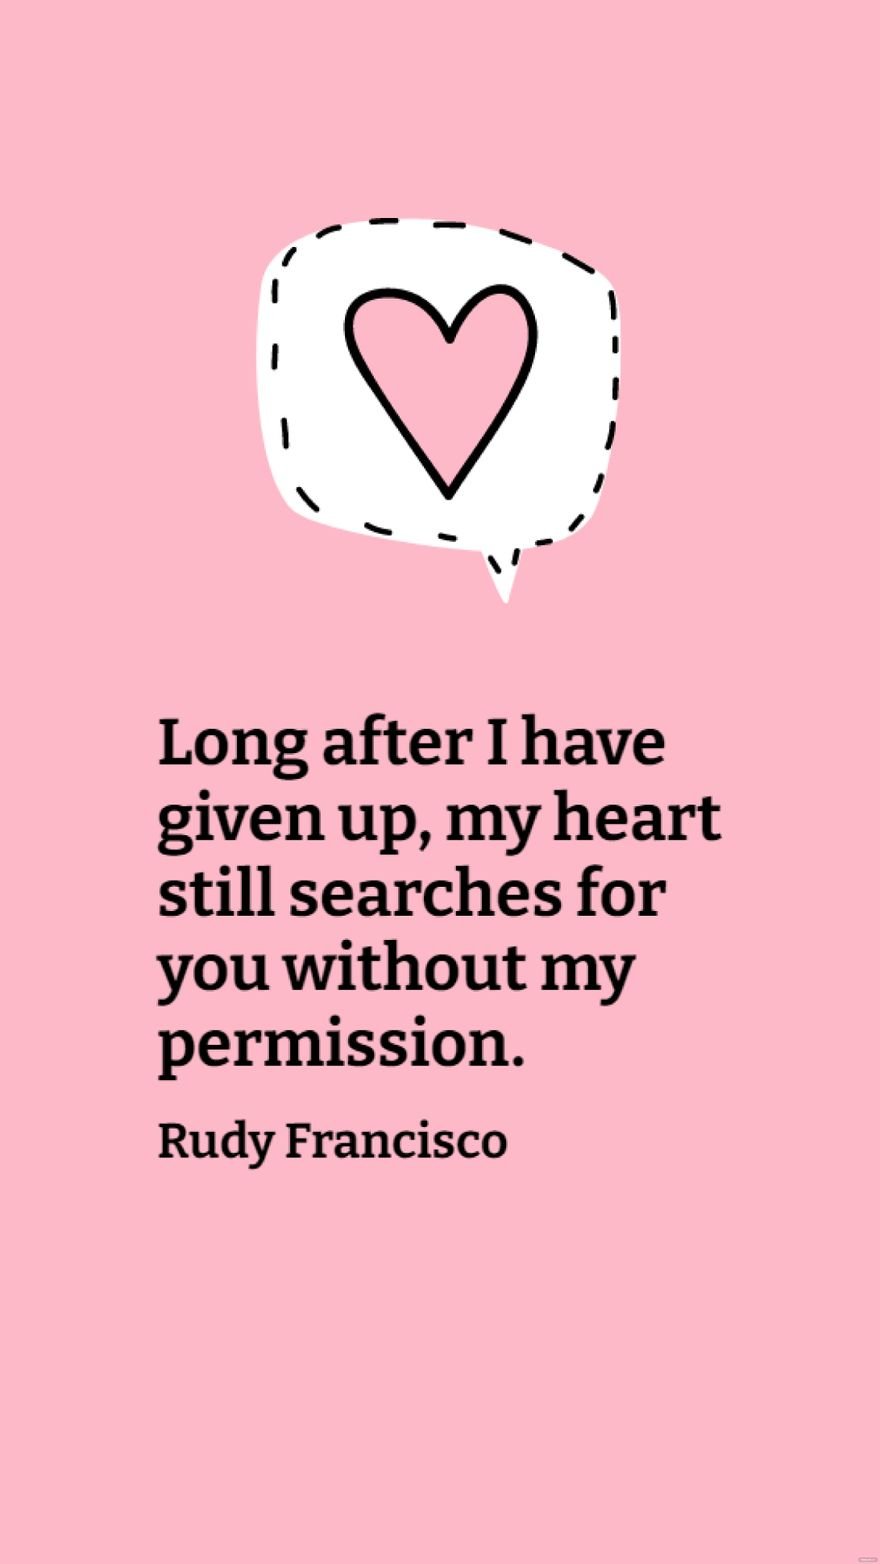 Rudy Francisco - Long after I have given up, my heart still searches for you without my permission.